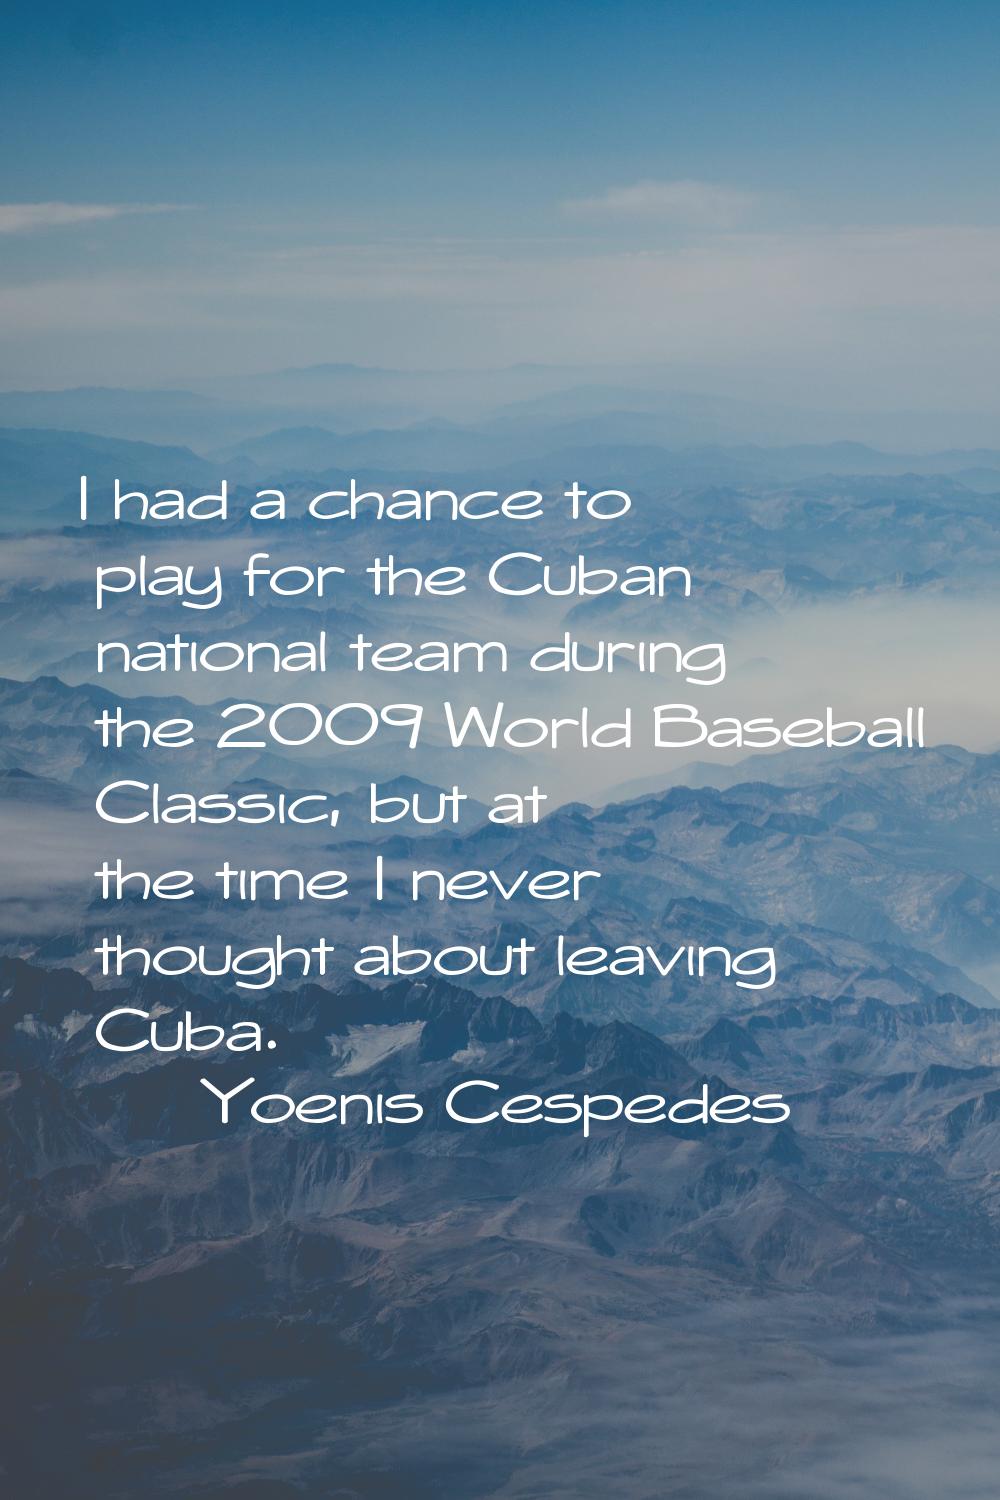 I had a chance to play for the Cuban national team during the 2009 World Baseball Classic, but at t